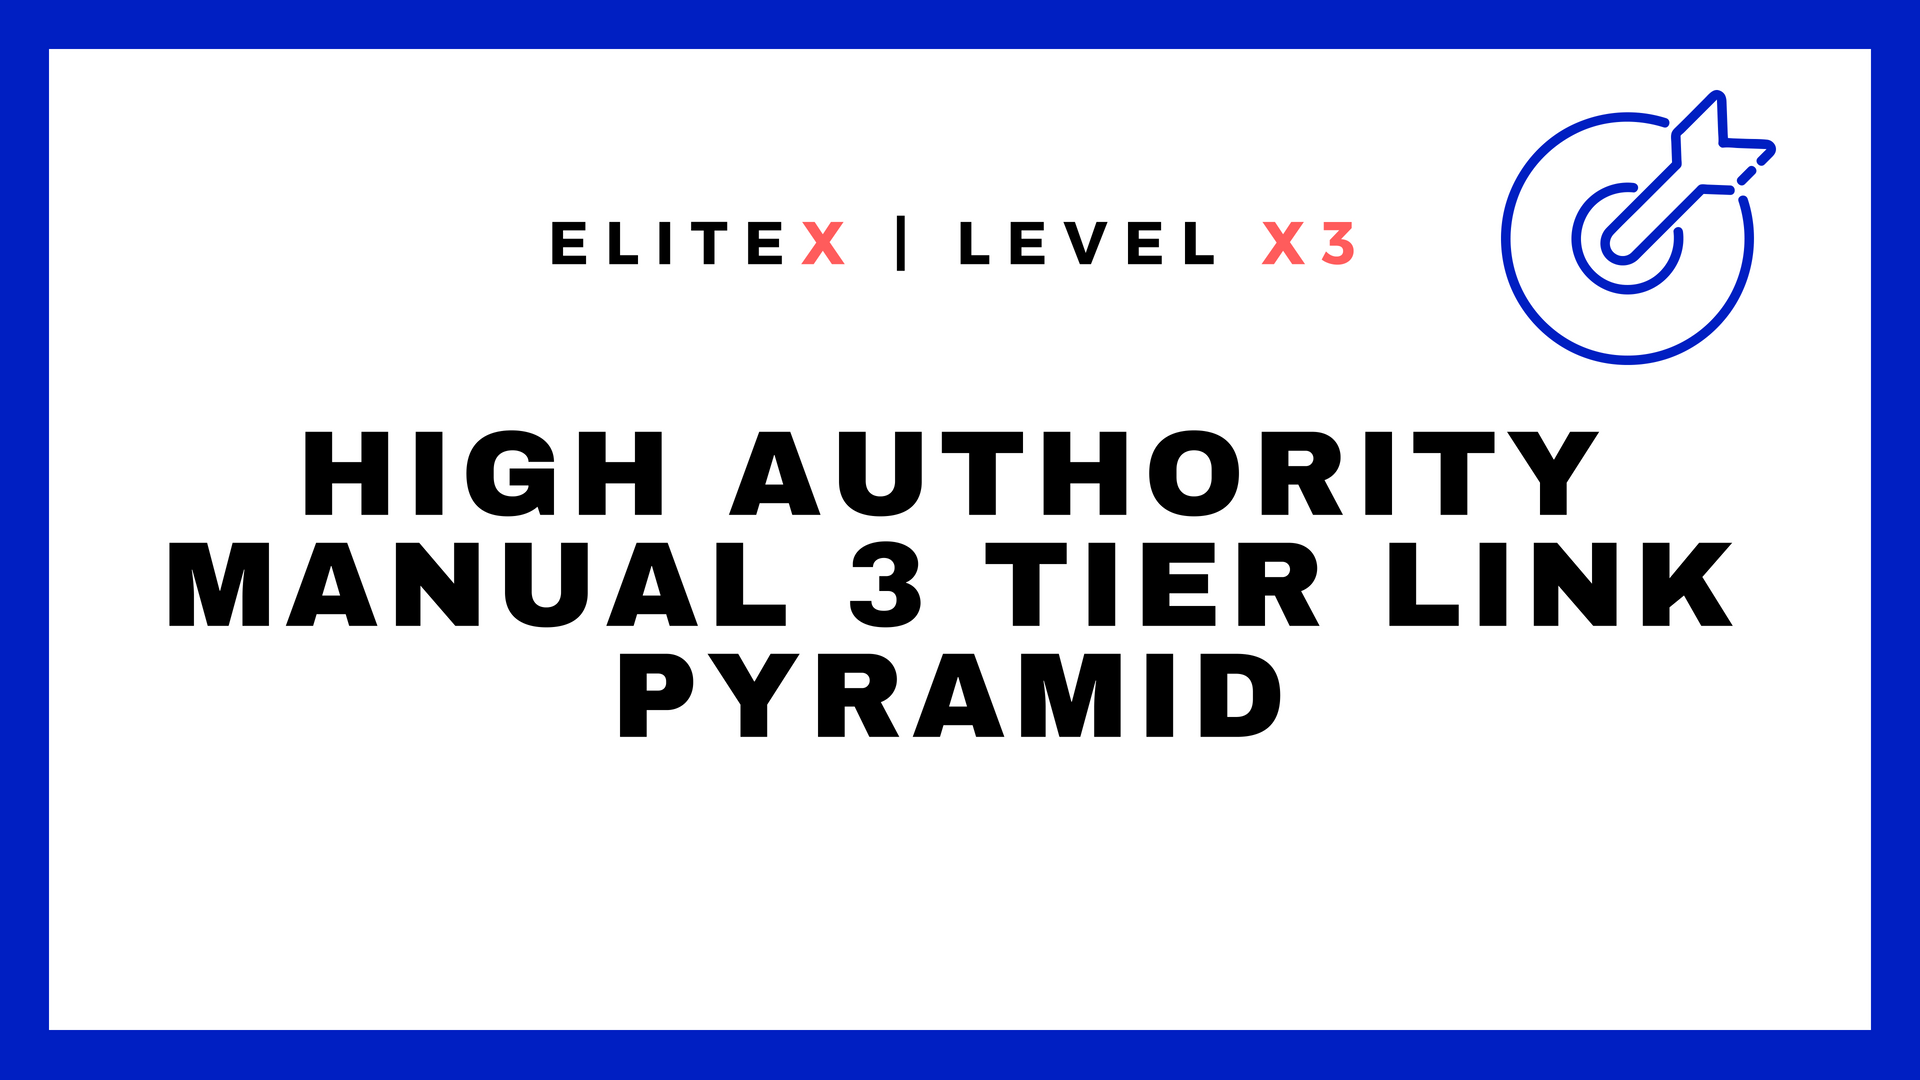 EliteX Google #1st Page Pusher - High Authority Manual 3 Tier Link Pyramid